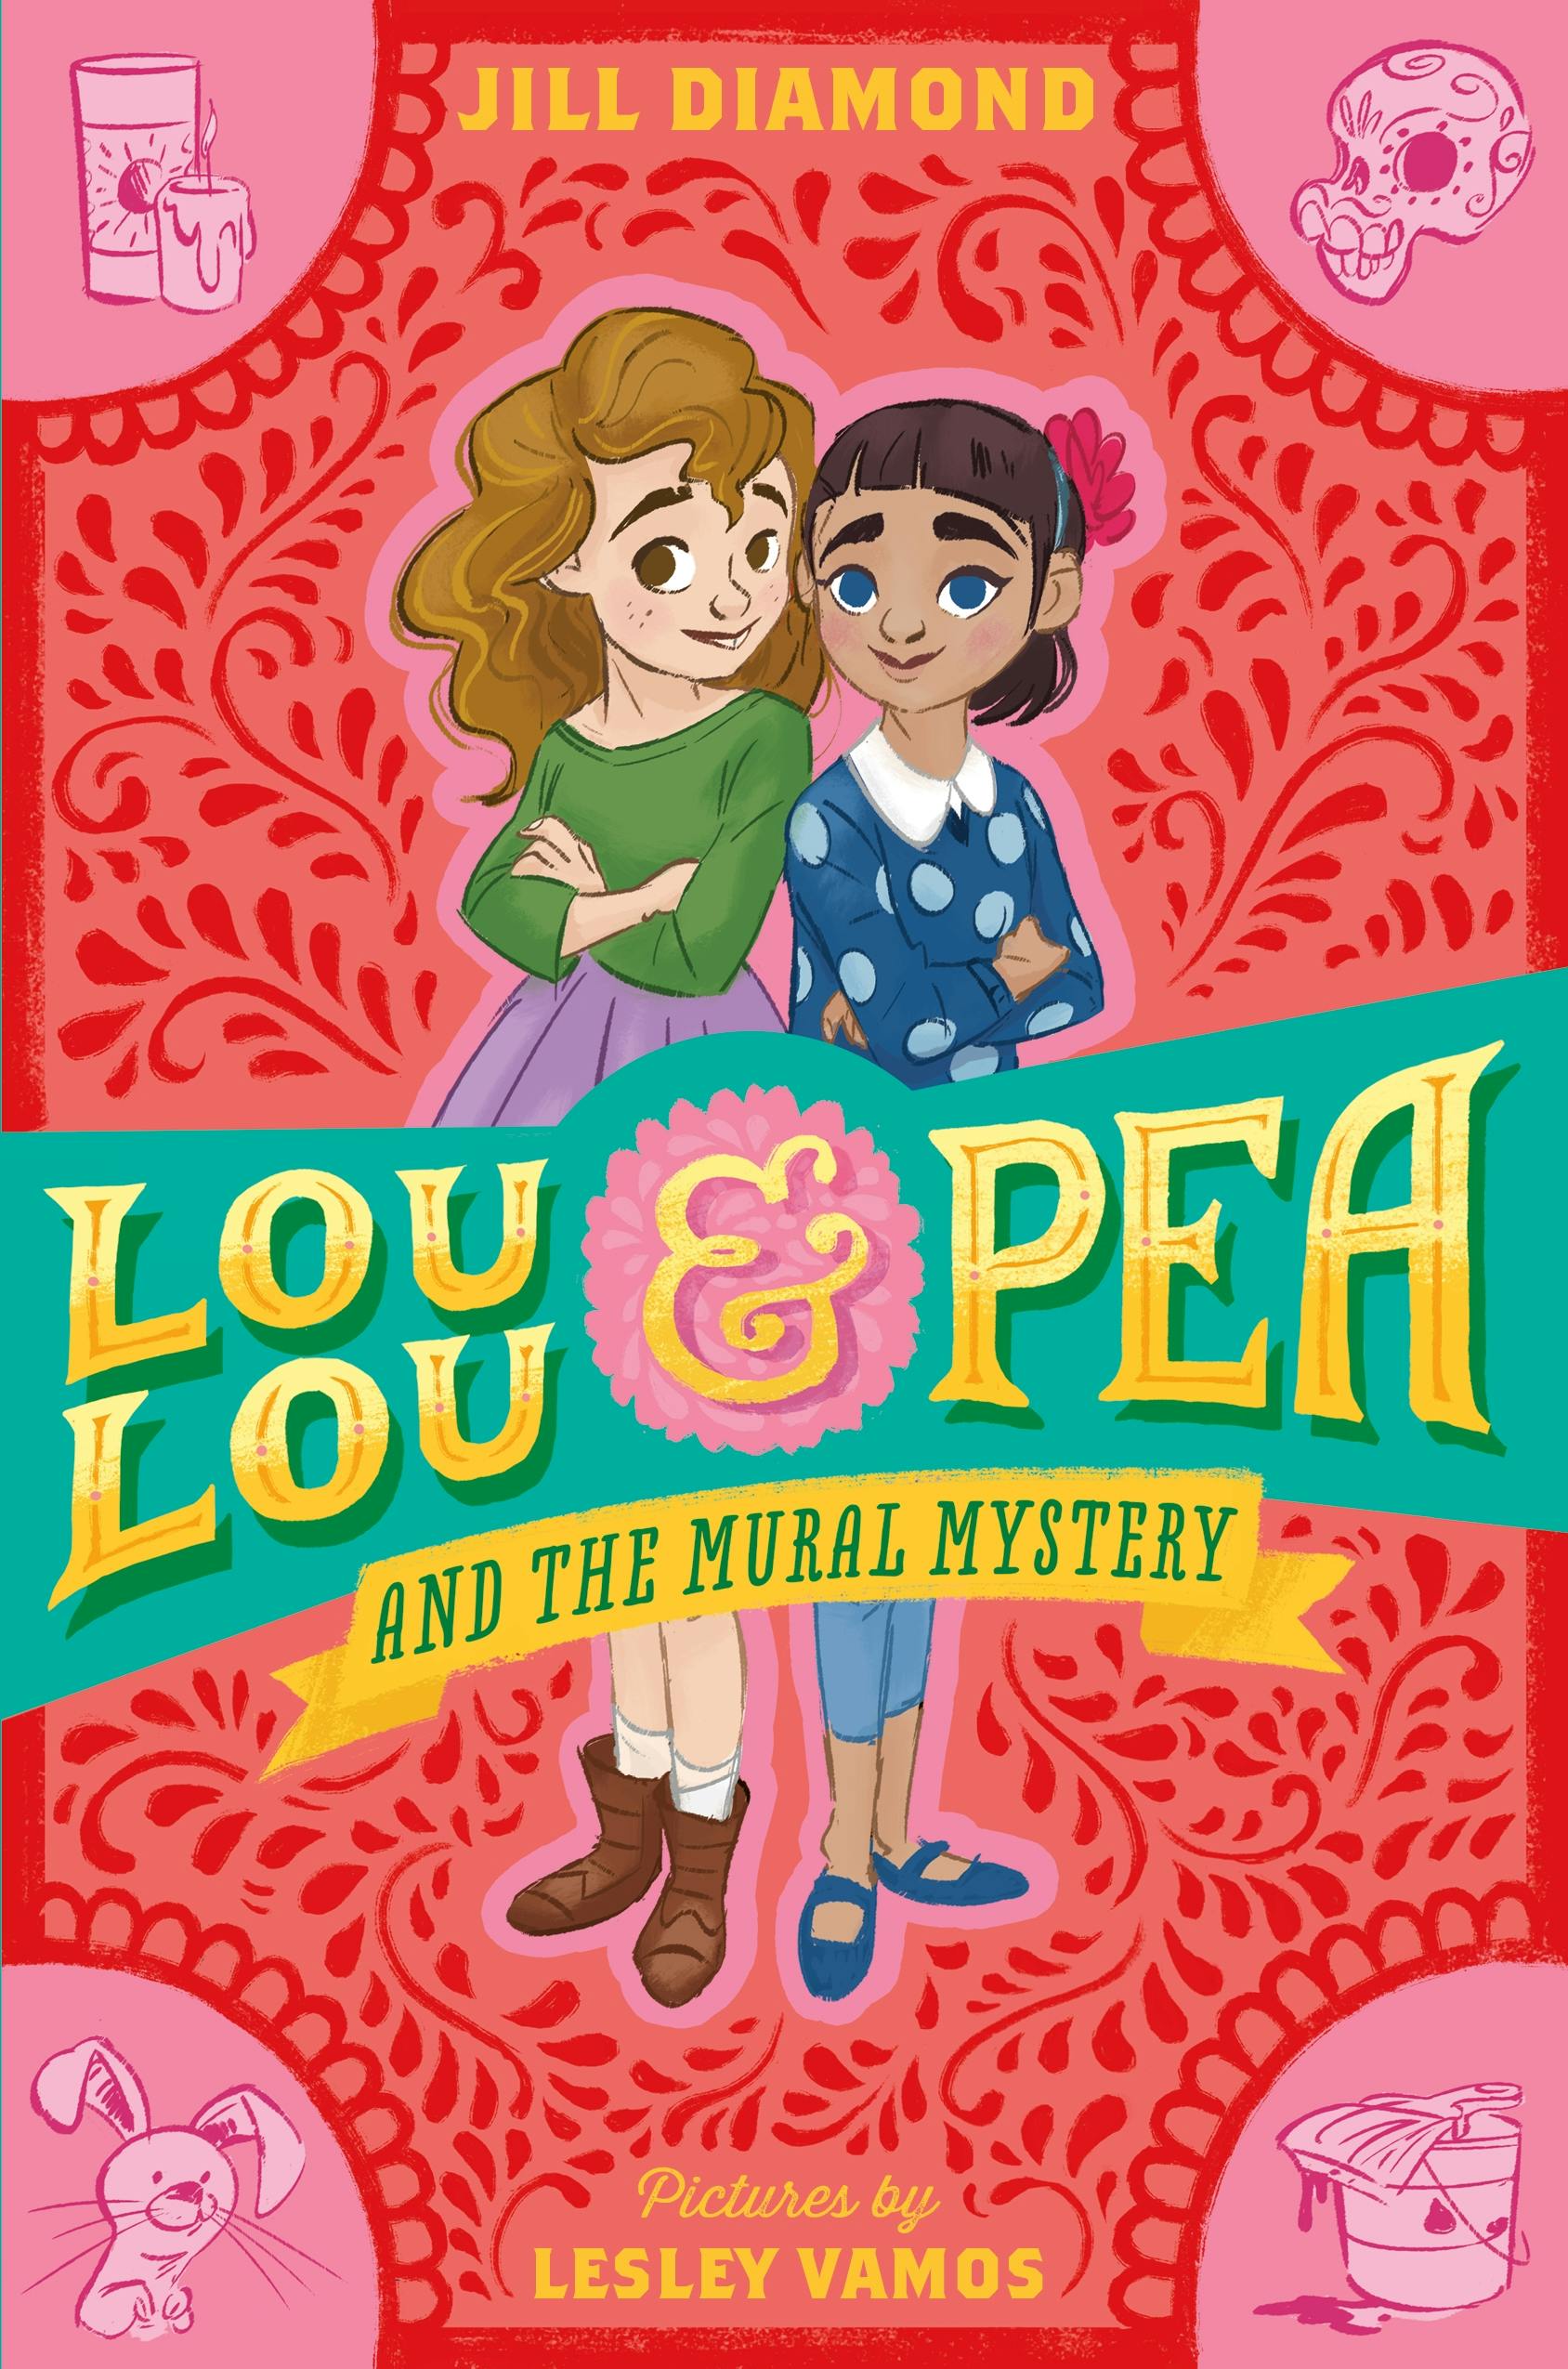 Image of Lou Lou and Pea and the Mural Mystery